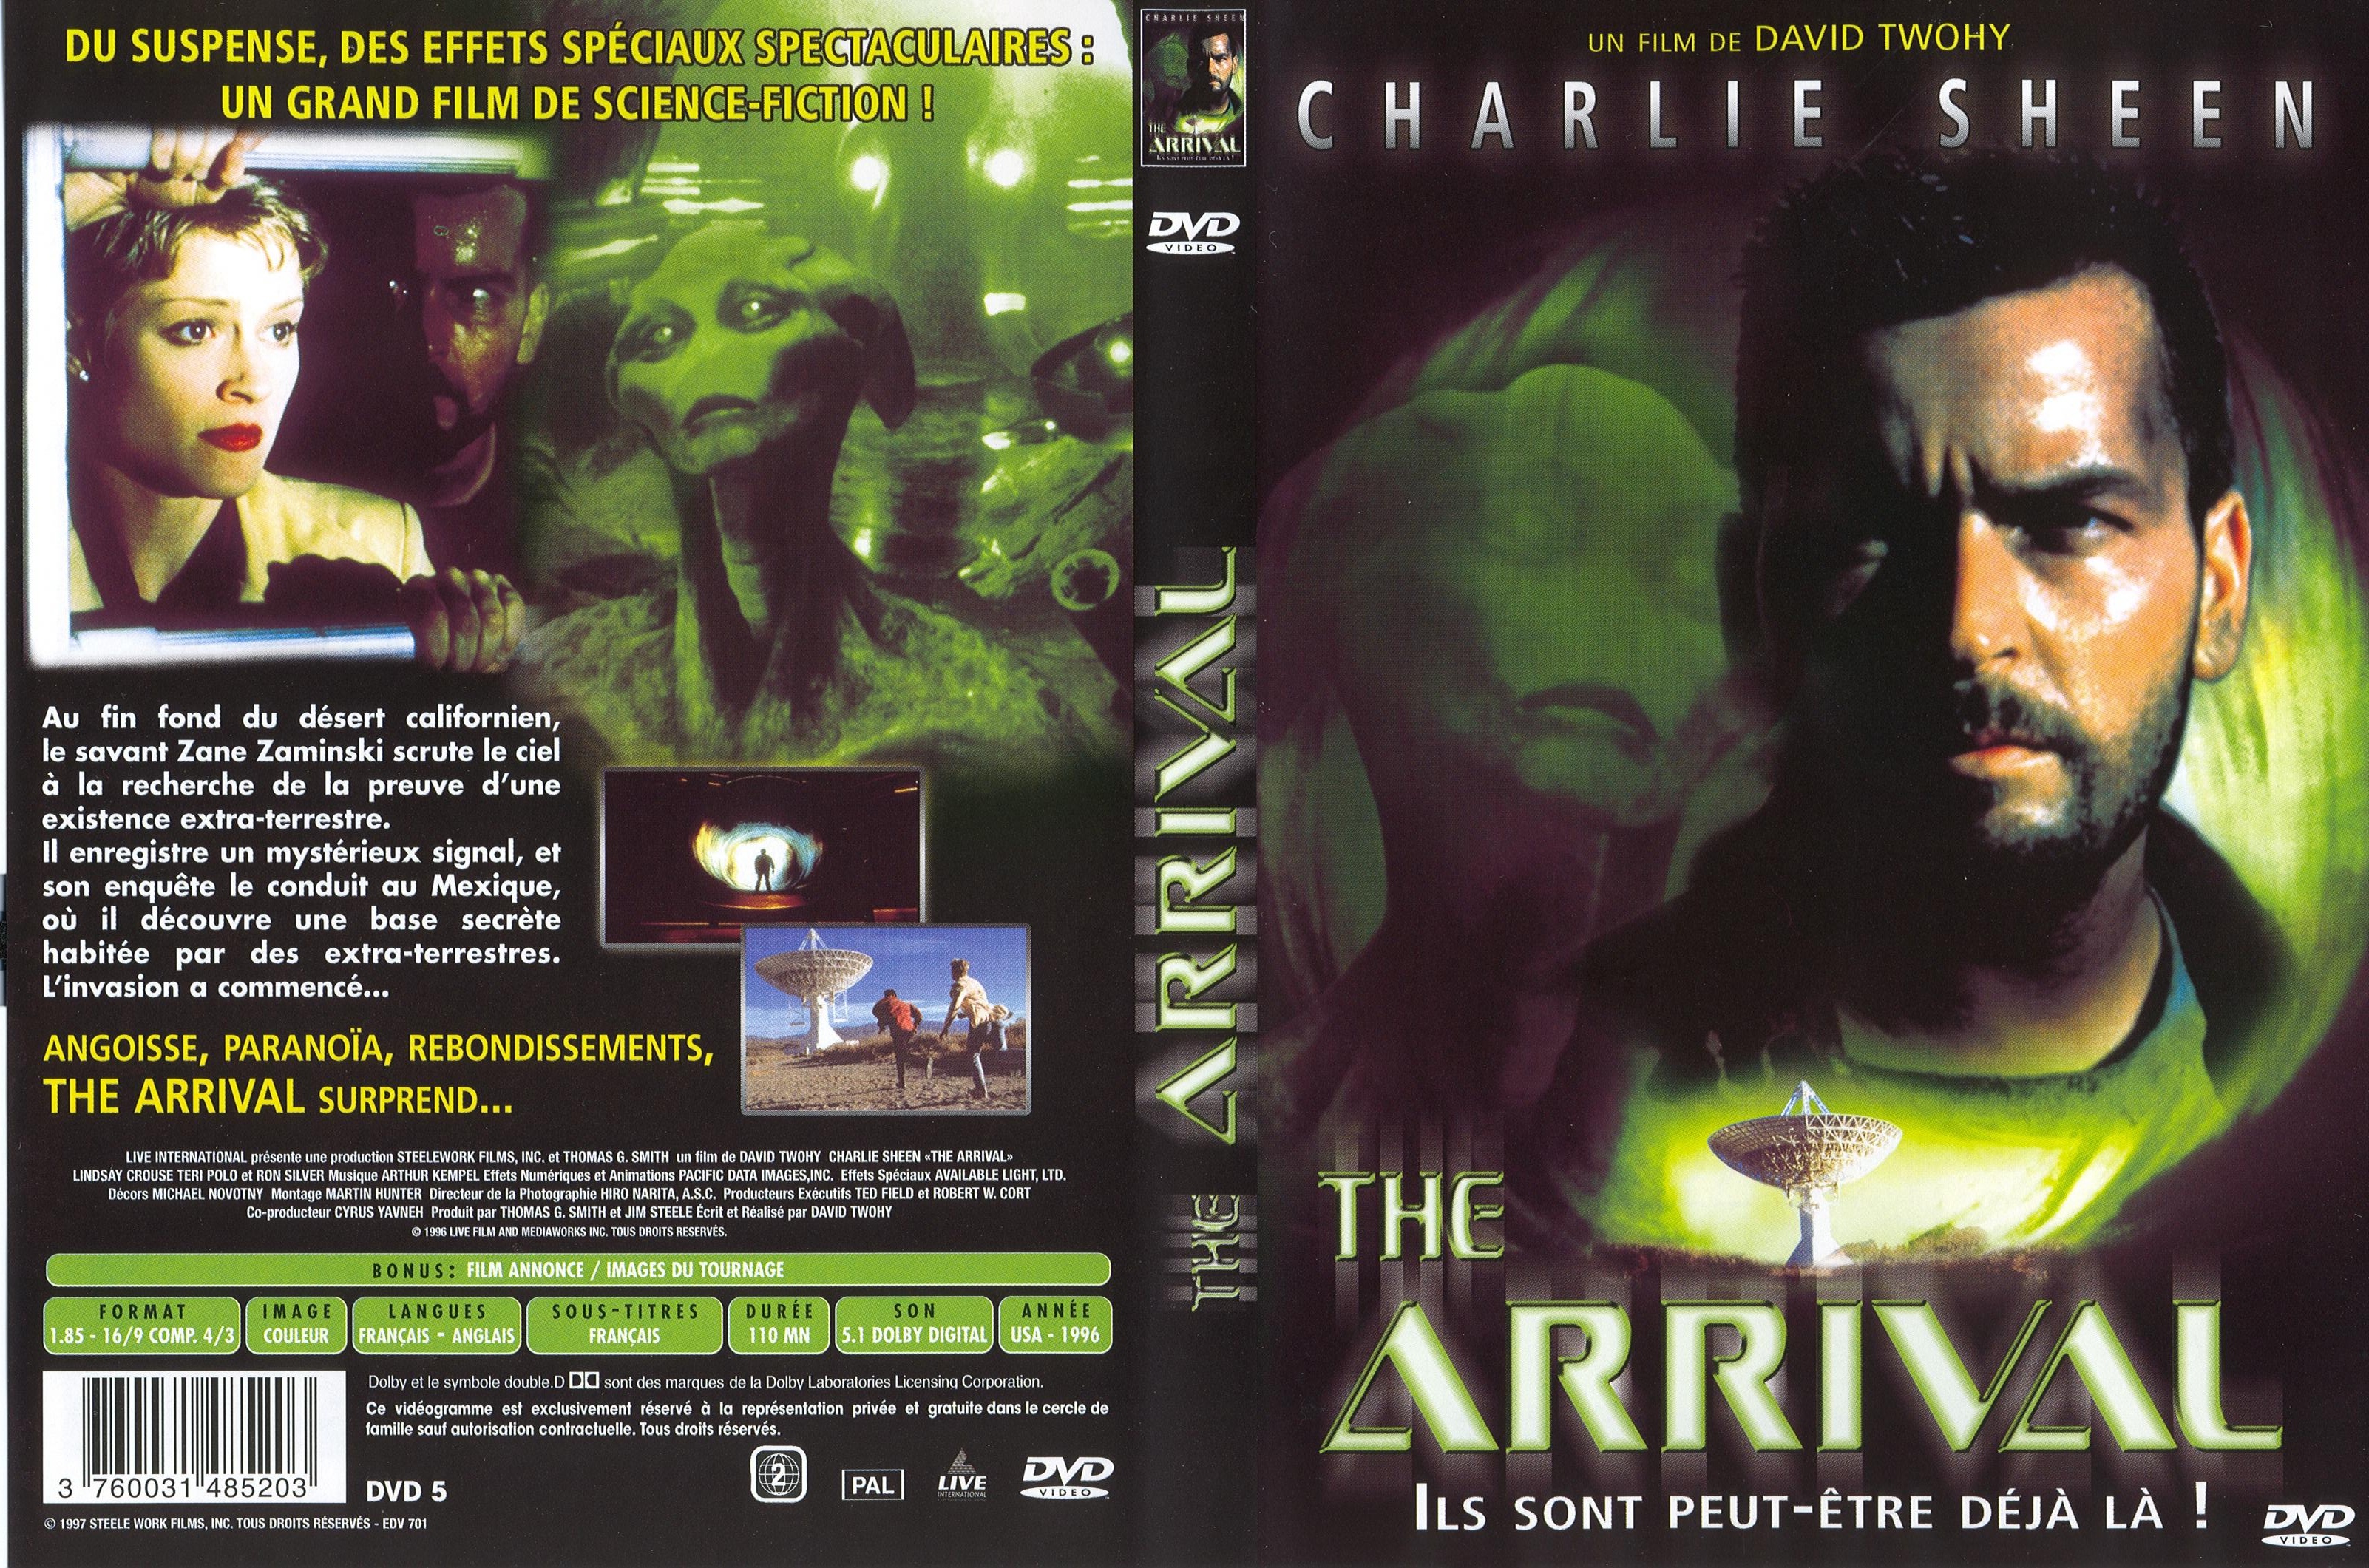 Jaquette DVD The arrival v2